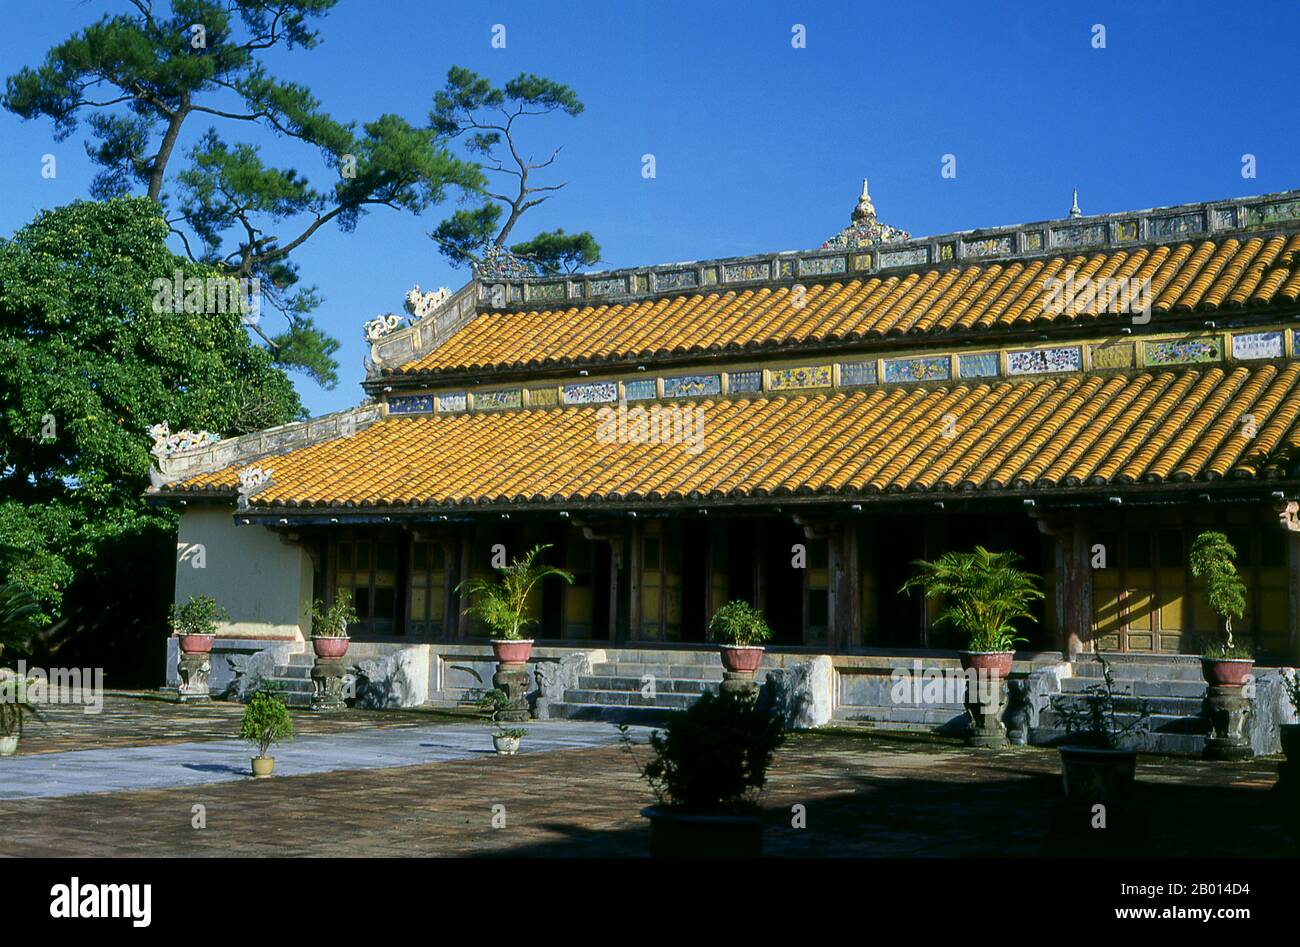 Vietnam: Courtyard at the Tomb of Emperor Thieu Tri, Hue.  Nguyễn Phúc Miên Tông (6 June 1807 – 4 November 1847) was the third emperor of the Vietnamese Nguyễn Dynasty taking the era name of Thiệu Trị. He was the eldest son of Emperor Minh Mạng, and reigned from 14 February 1841 until his death on 4 November 1847.  Emperor Thiệu Trị was much like his father Minh Mạng and carried on his conservative policies of isolationism and the entrenchment of Confucianism. Highly educated in the Confucian tradition, Thiệu Trị had some curiosity about the West, but like his father was very suspicious. Stock Photo